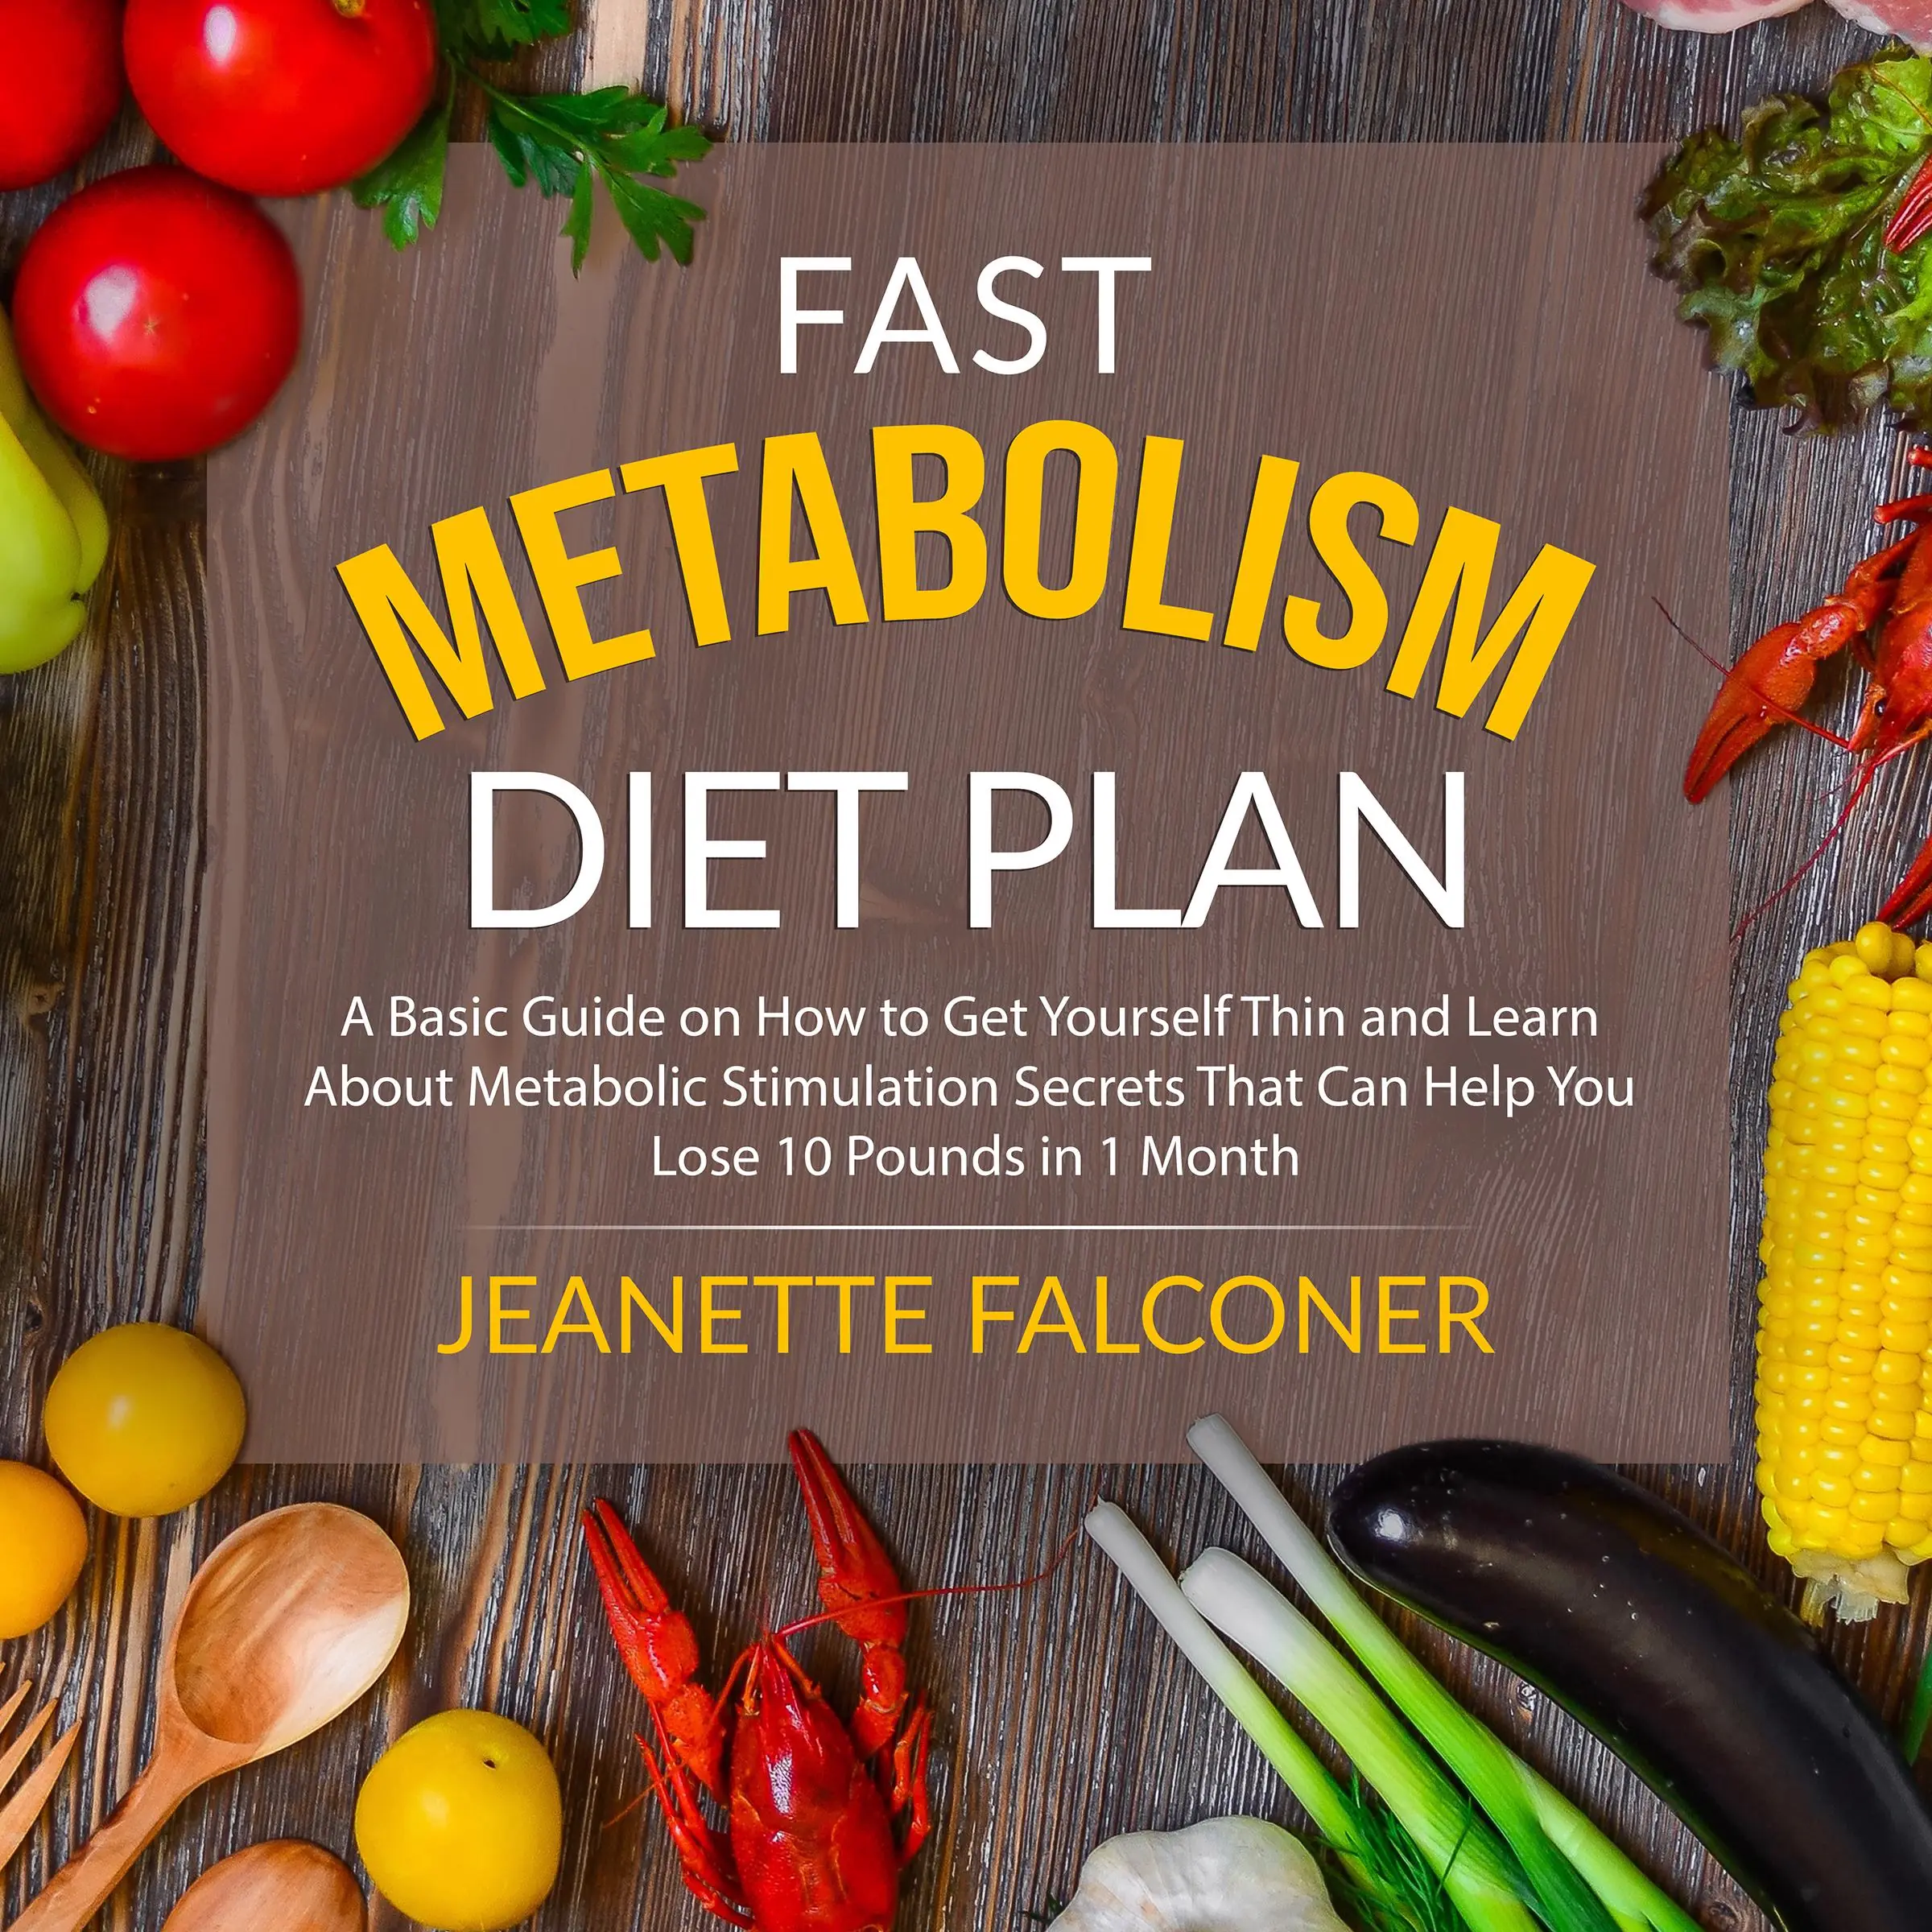 Fast Metabolism Diet Plan: A Basic Guide on How to Eat Yourself Thin and Learn About Metabolic Stimulation Secrets That Can Help You Lose 10 Pounds in 1 Month Audiobook by Jeanette Falconer